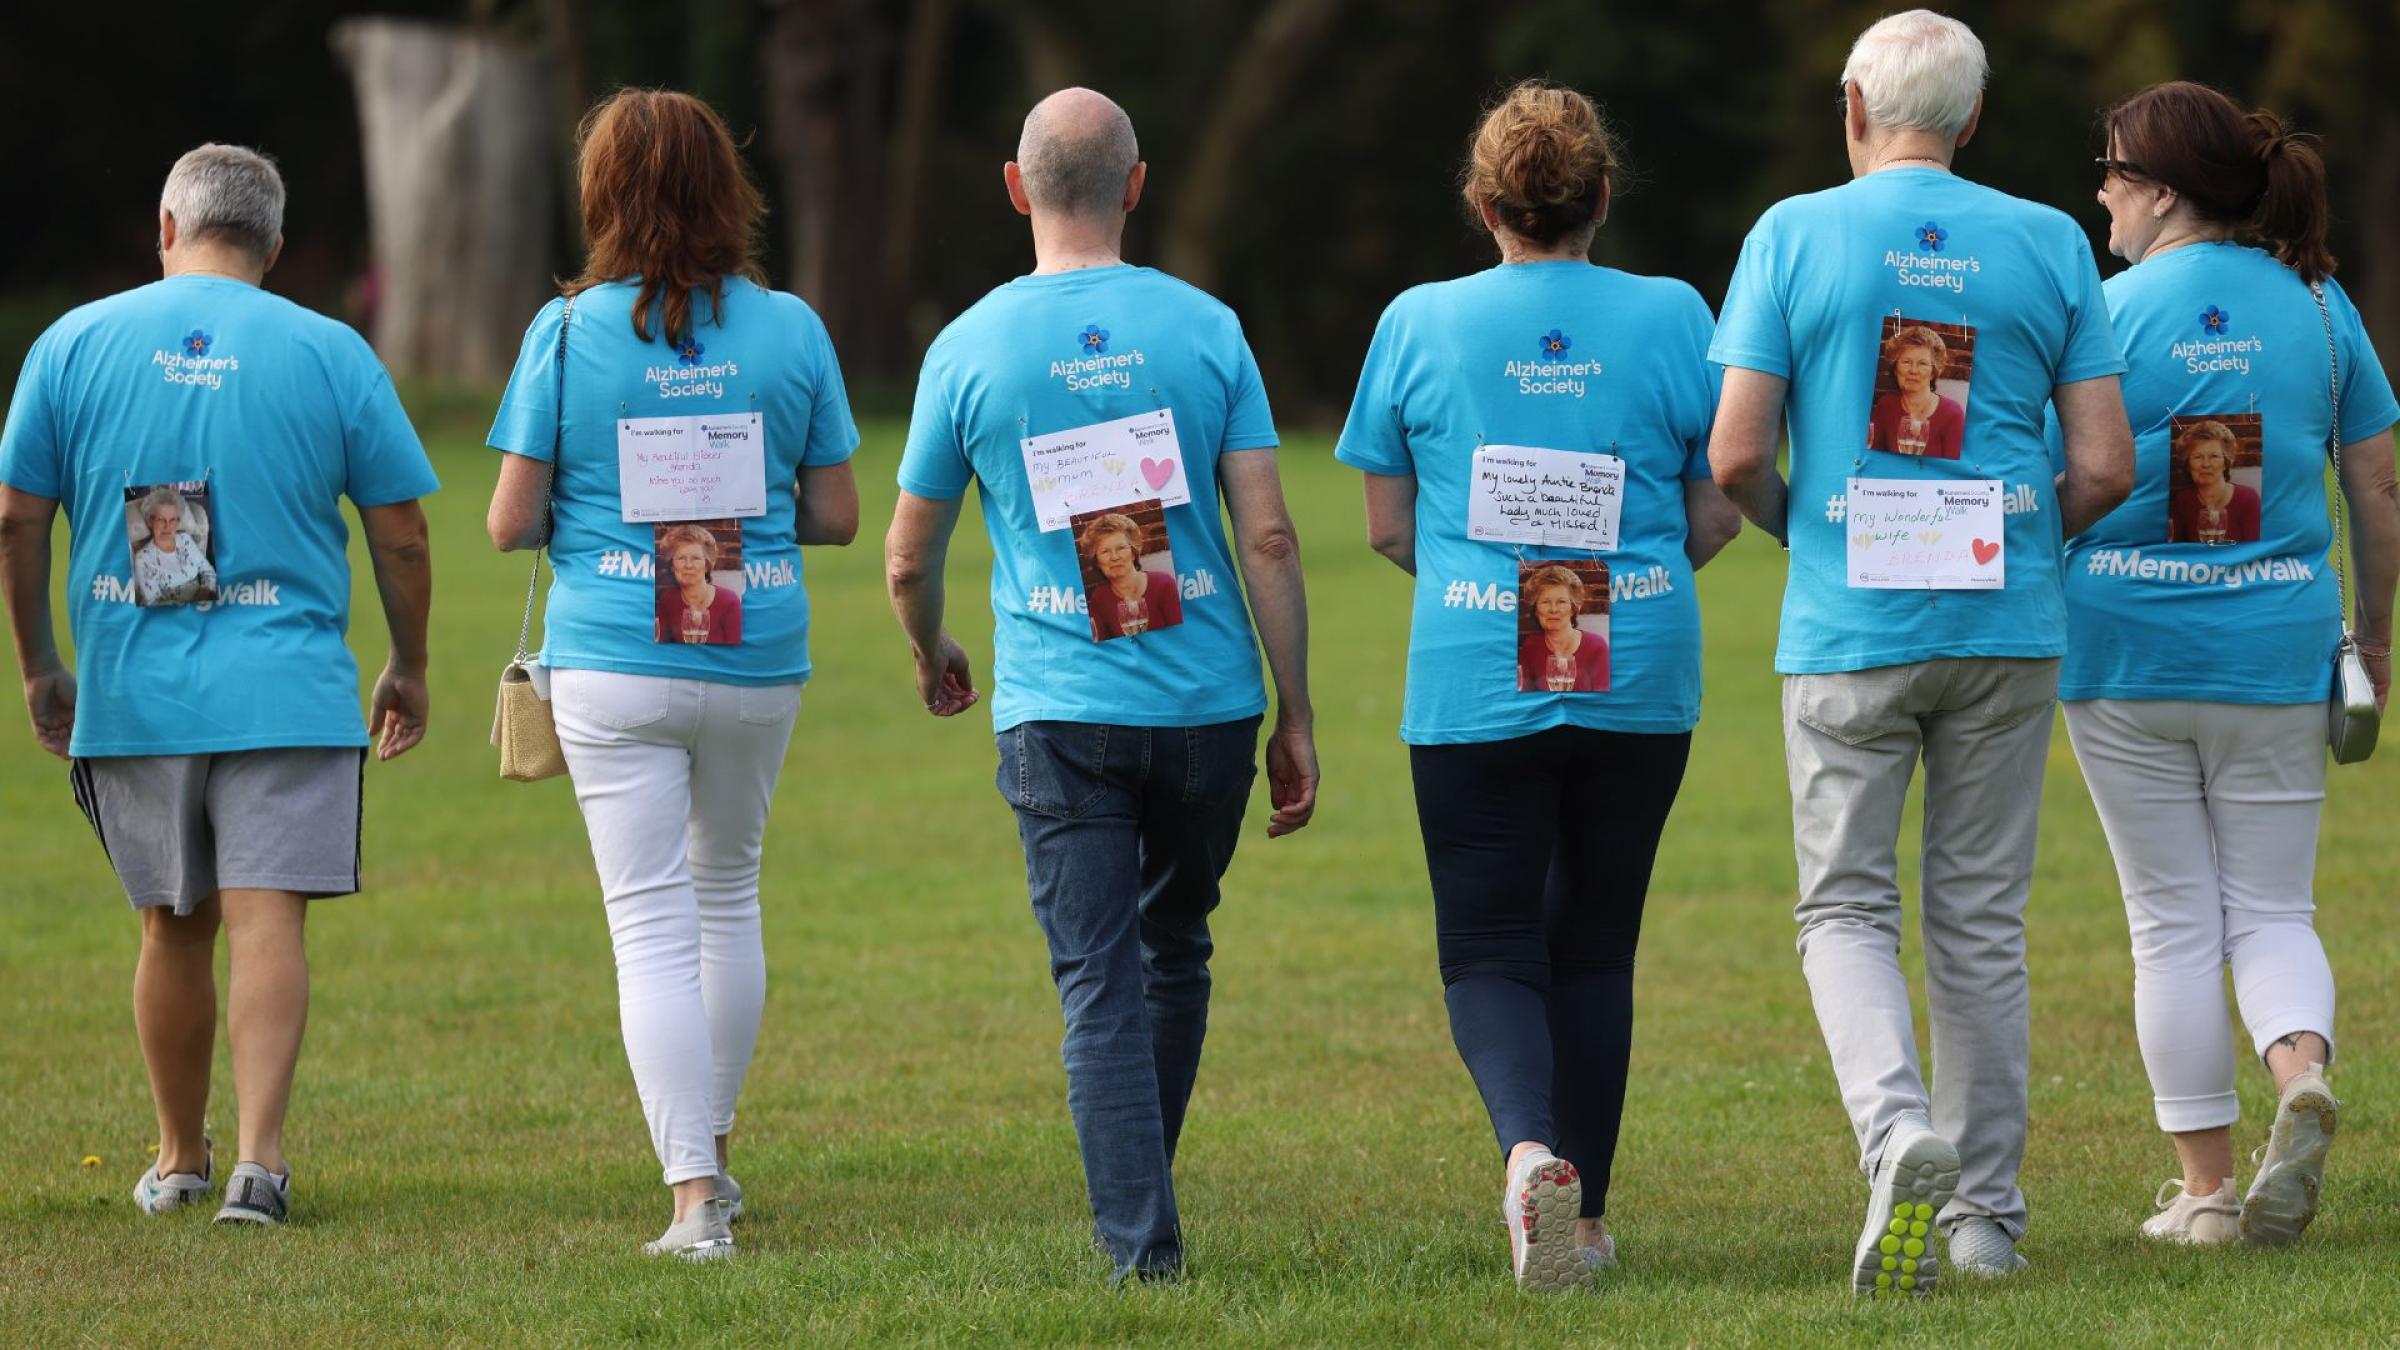 6 people in blue Memory Walk t-shirts, walking away from the camera with a picture of a loved one on their backs.